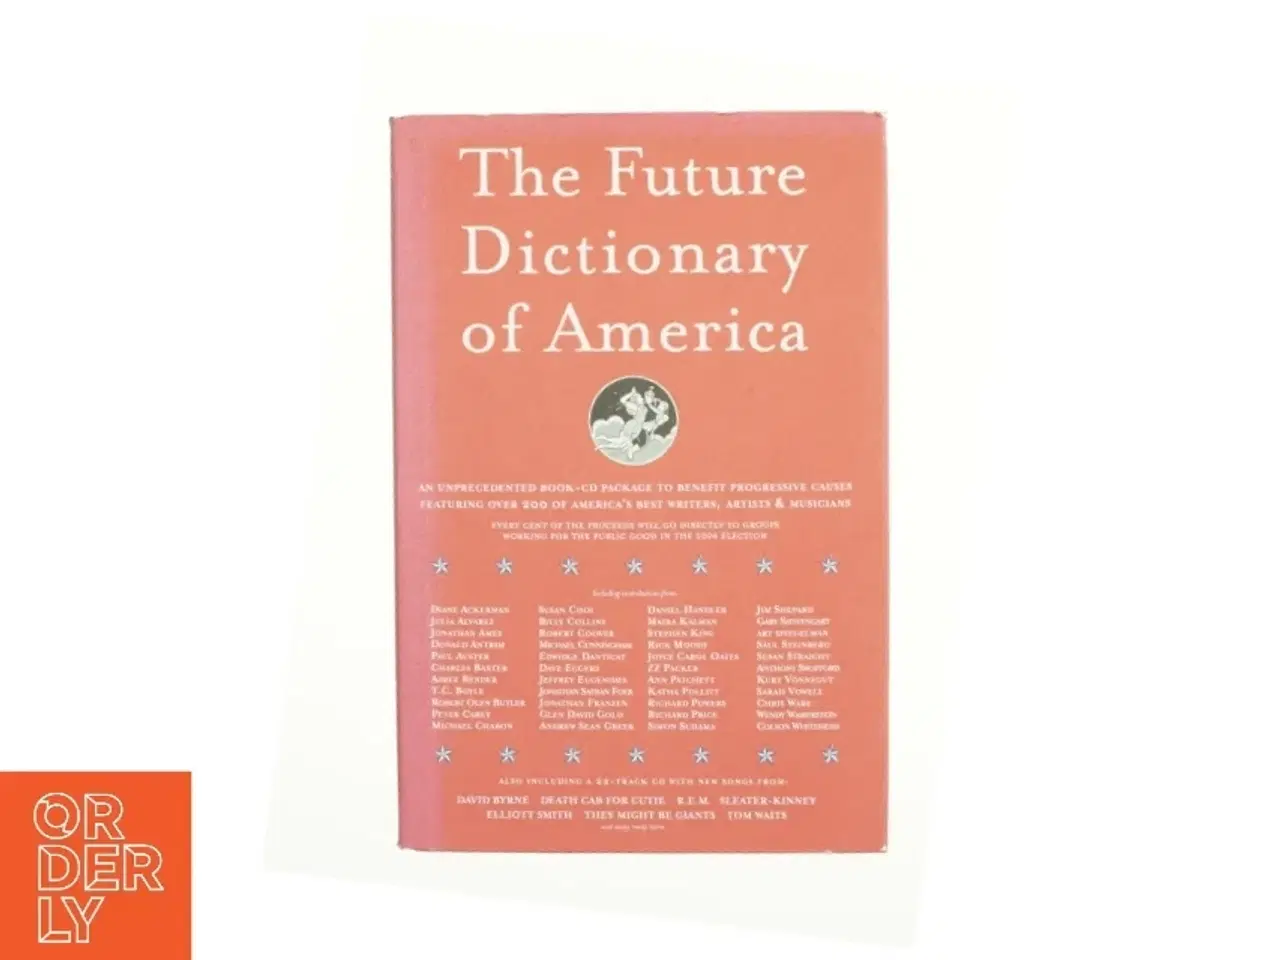 Billede 1 - The future dictionary of America : a book to benefit progressive causes in the 2004 elections featuring over 170 of America's best writers and artists